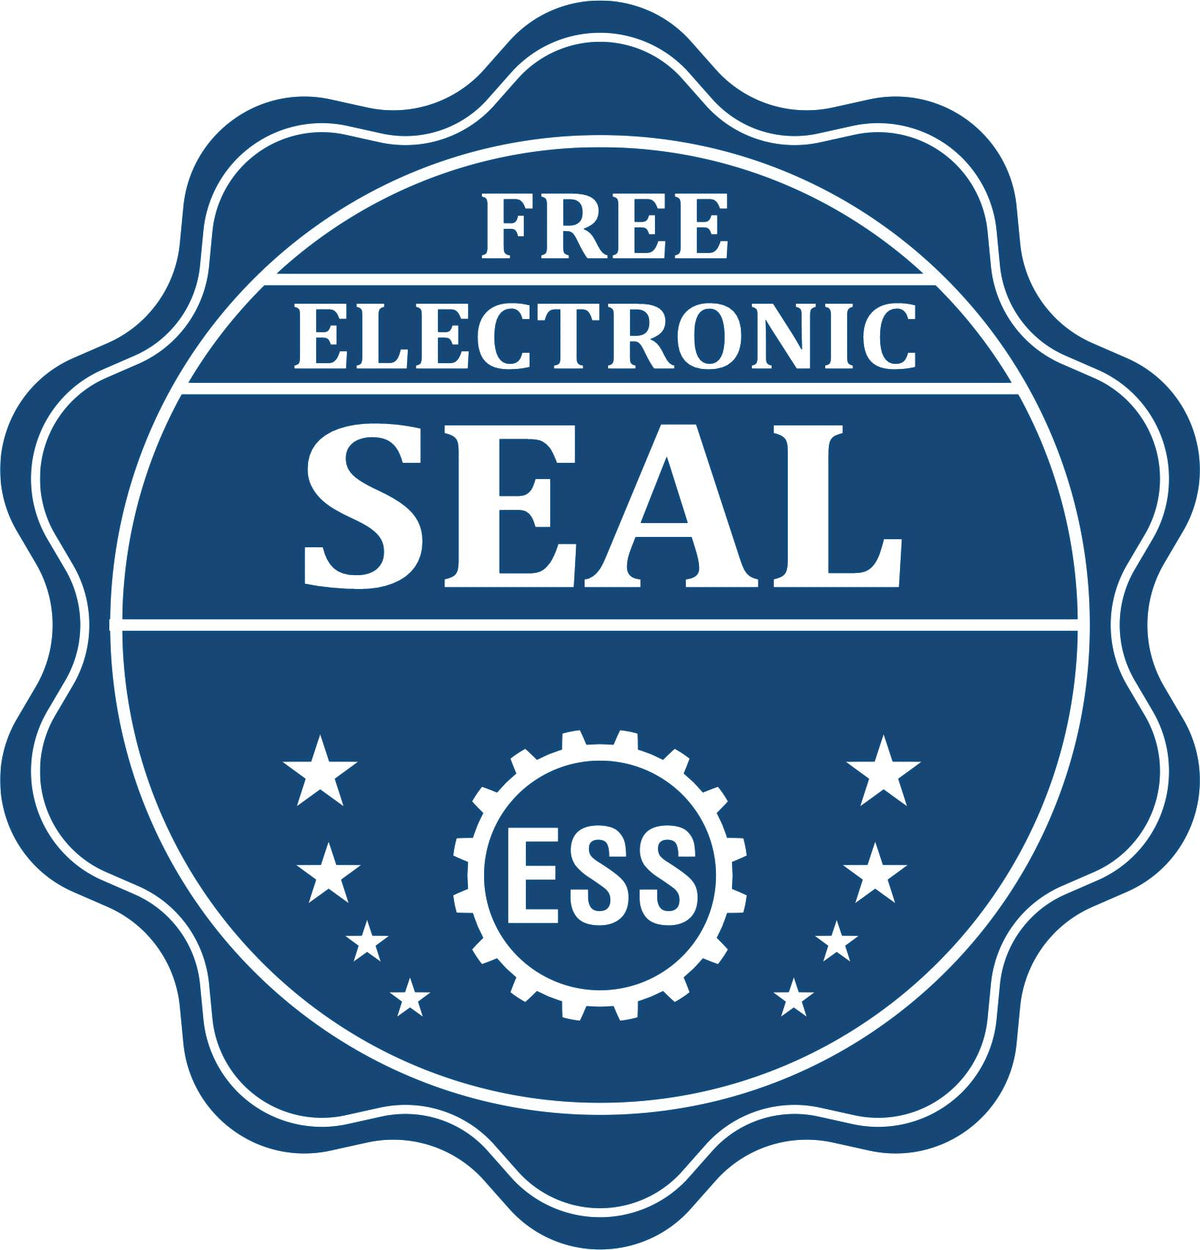 A badge showing a free electronic seal for the Gift Oklahoma Land Surveyor Seal with stars and the ESS gear on the emblem.